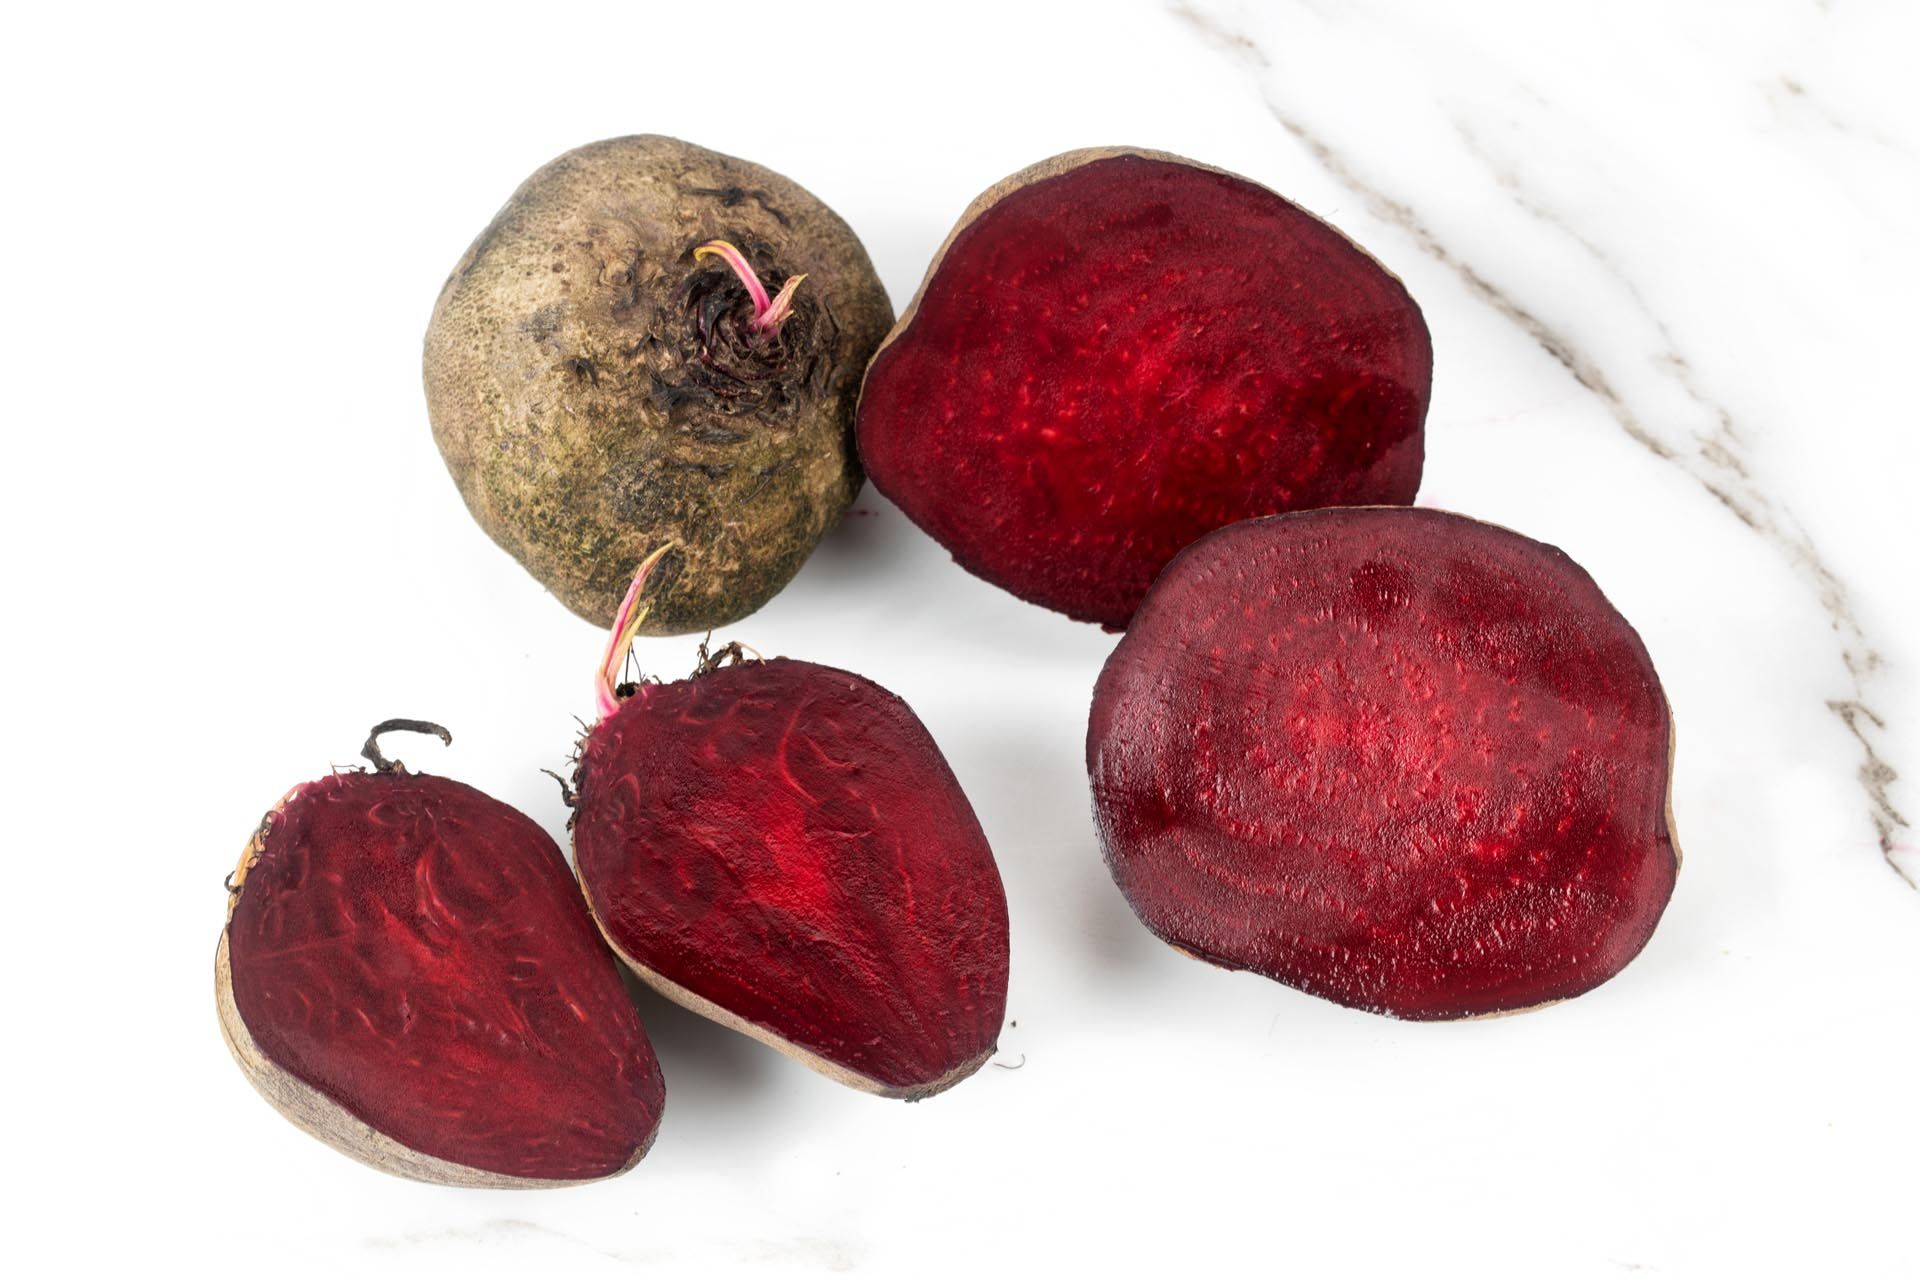 Types of Beets